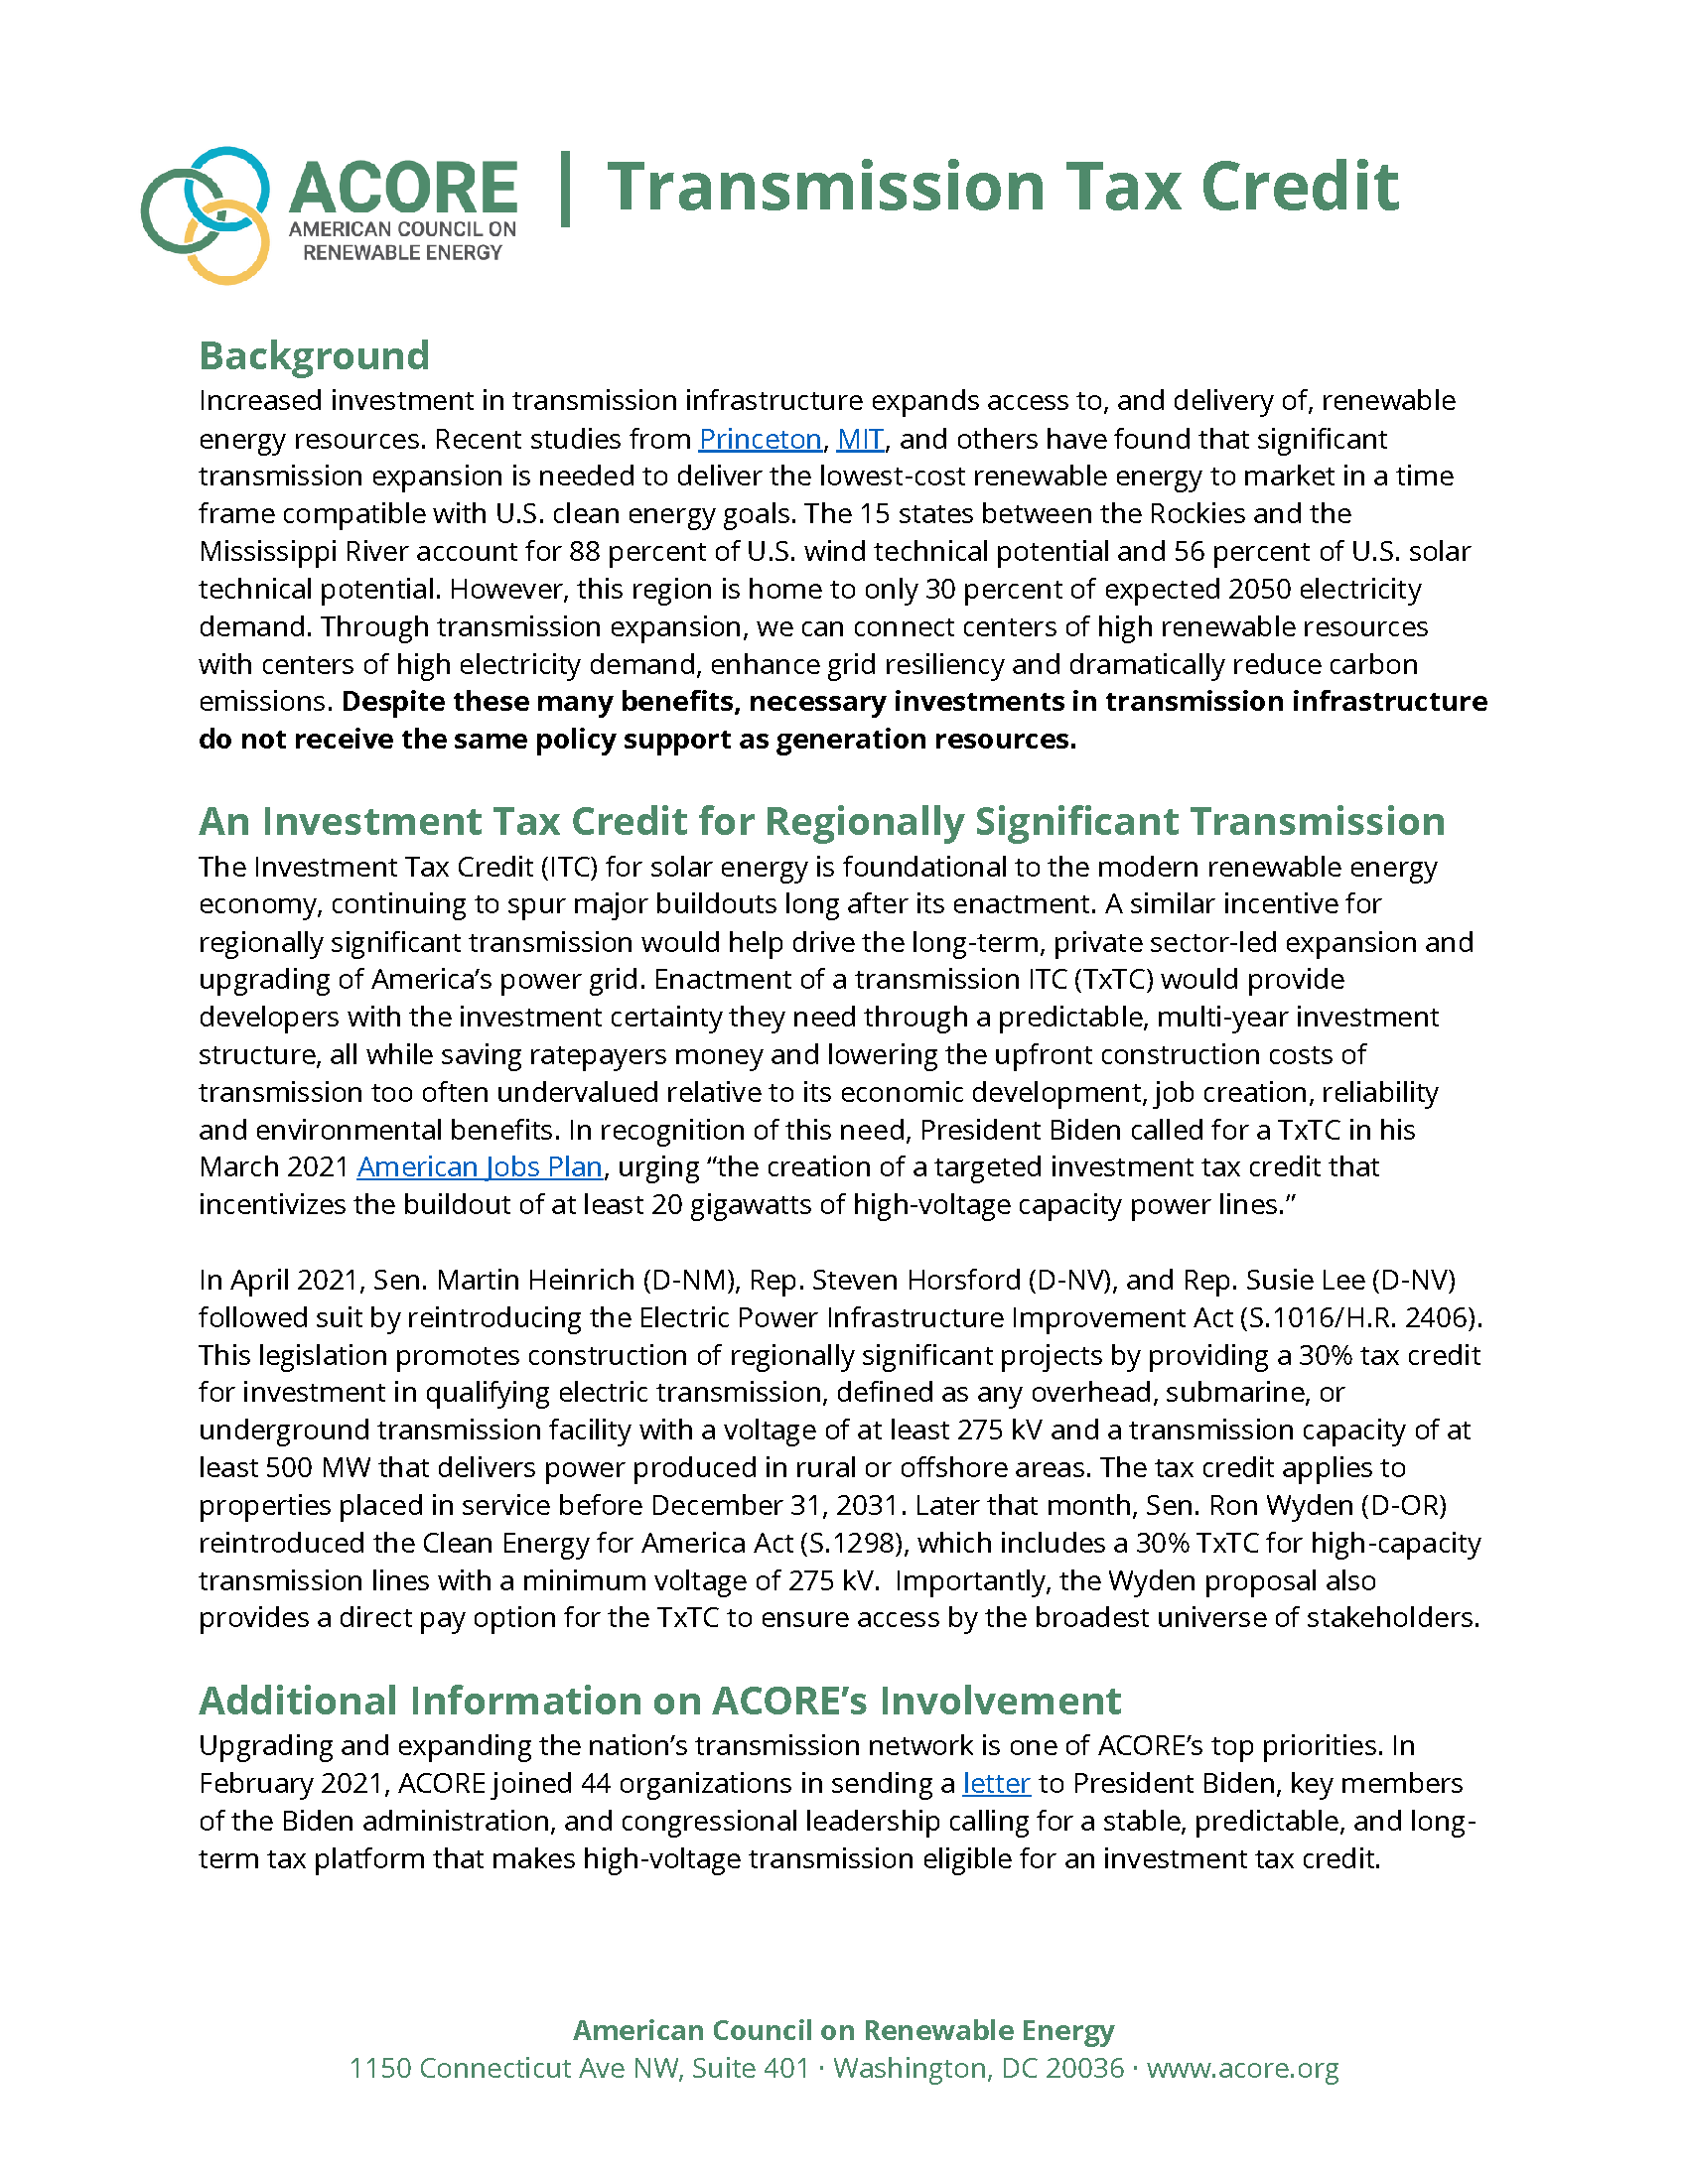 First page of the Transmission ITC fact sheet by ACORE